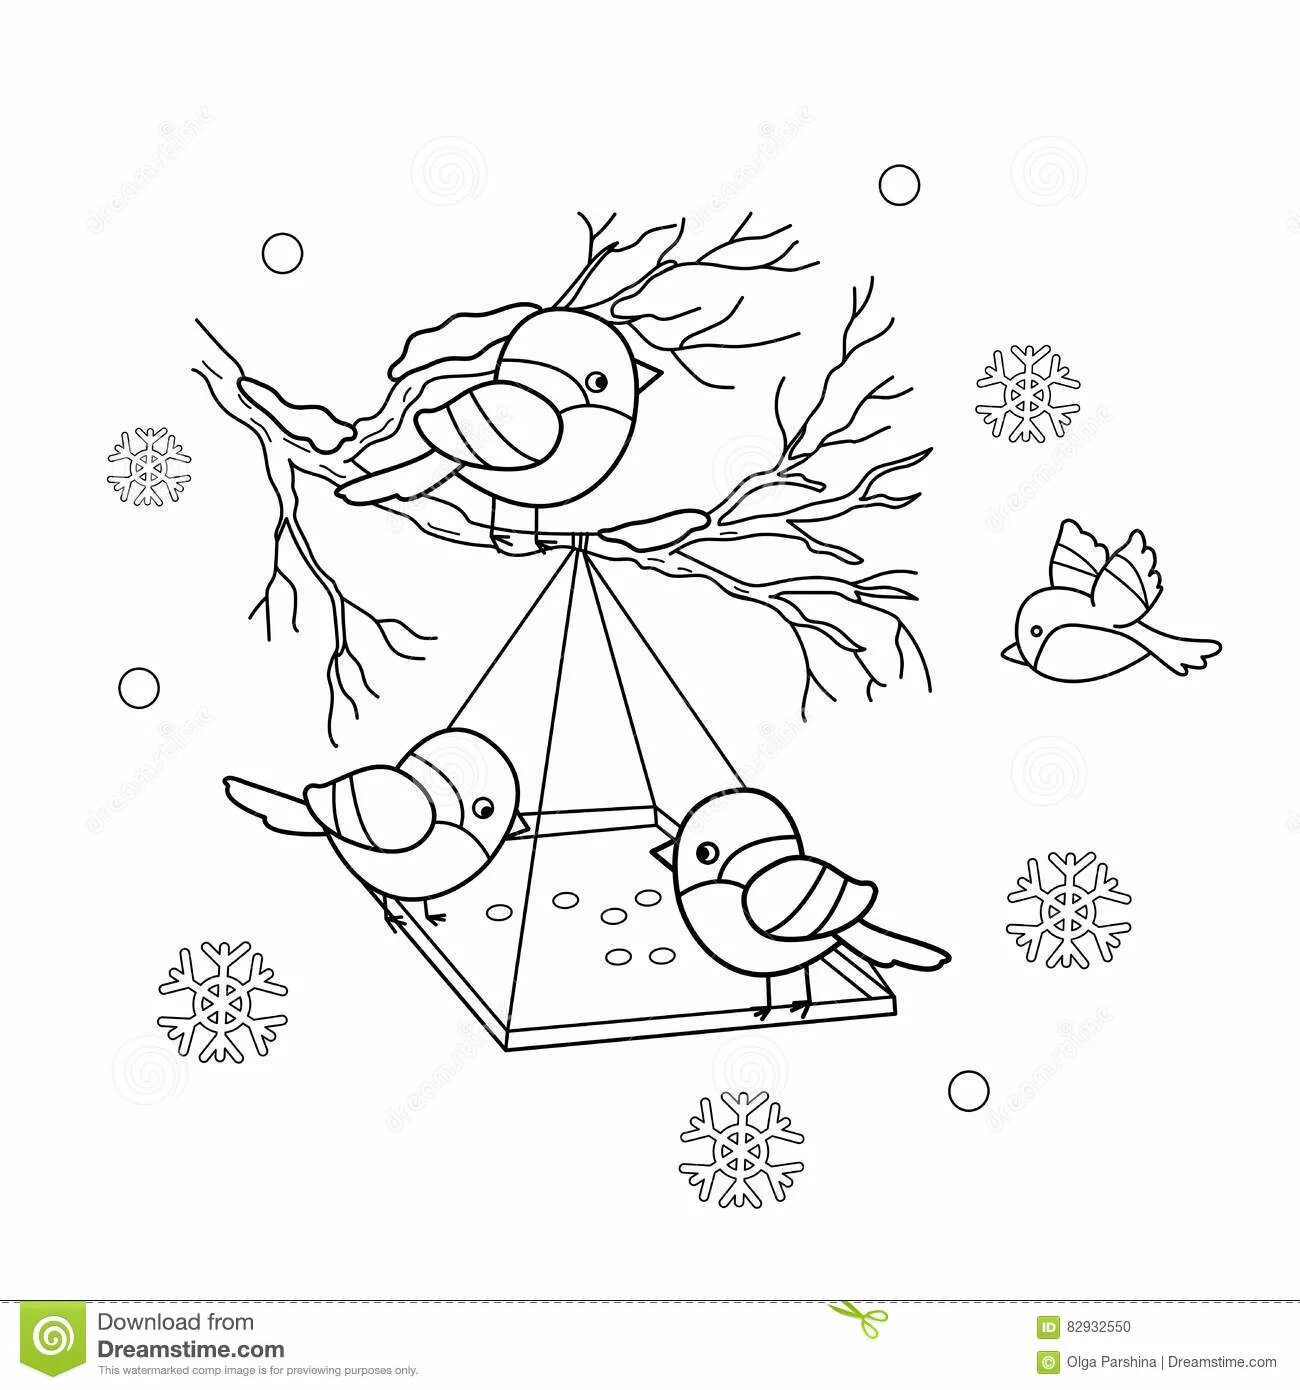 Violent winter birds coloring for children 3-4 years old